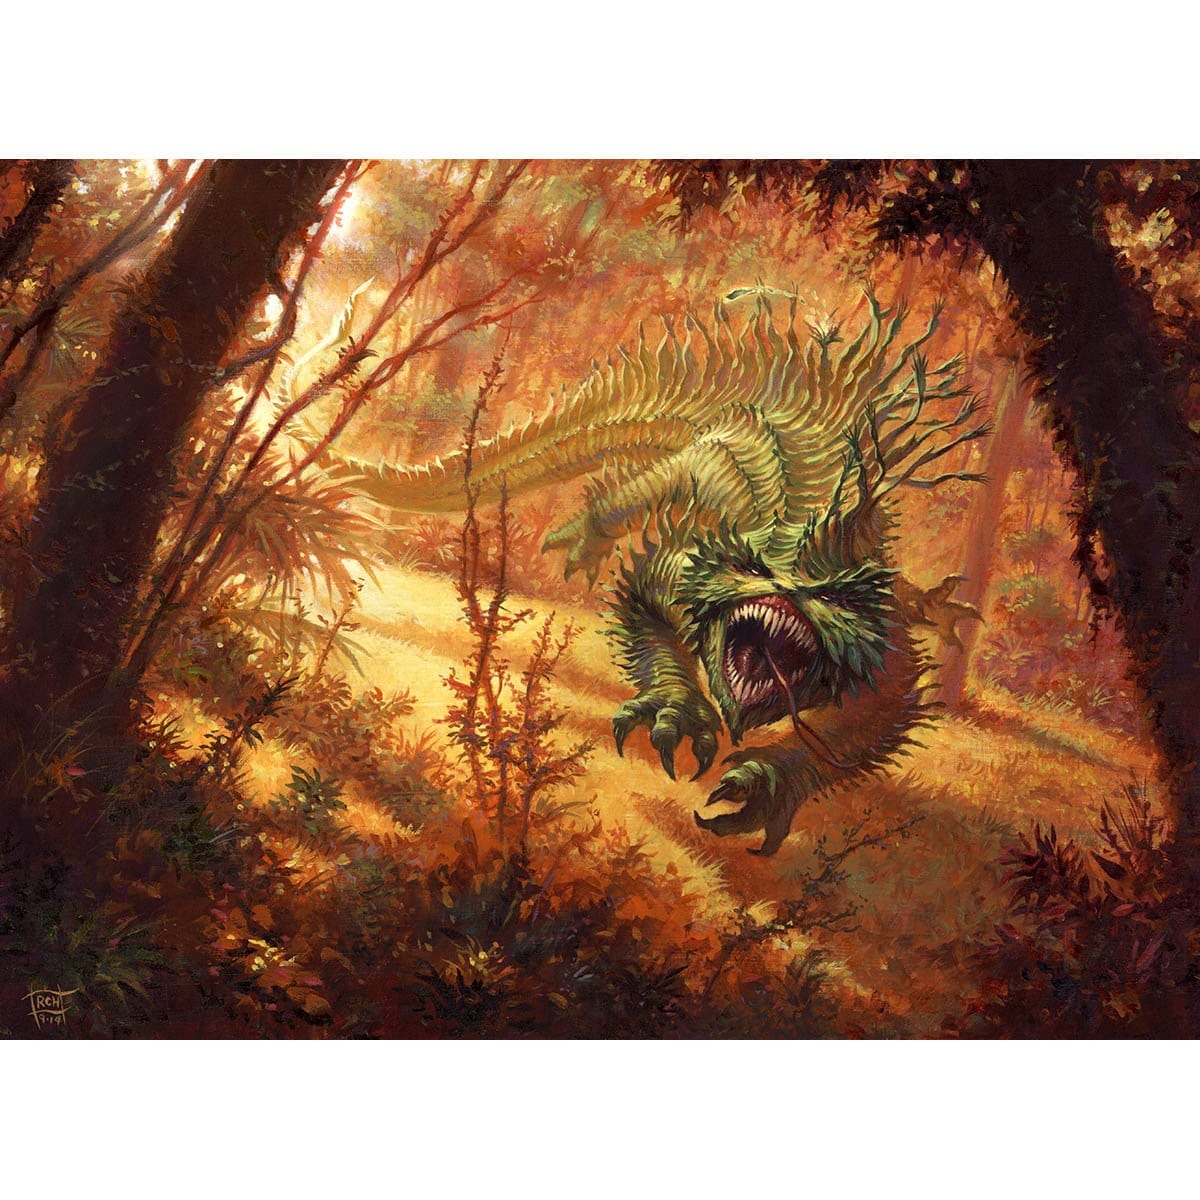 Bloodspore Thrinax Print - Print - Original Magic Art - Accessories for Magic the Gathering and other card games